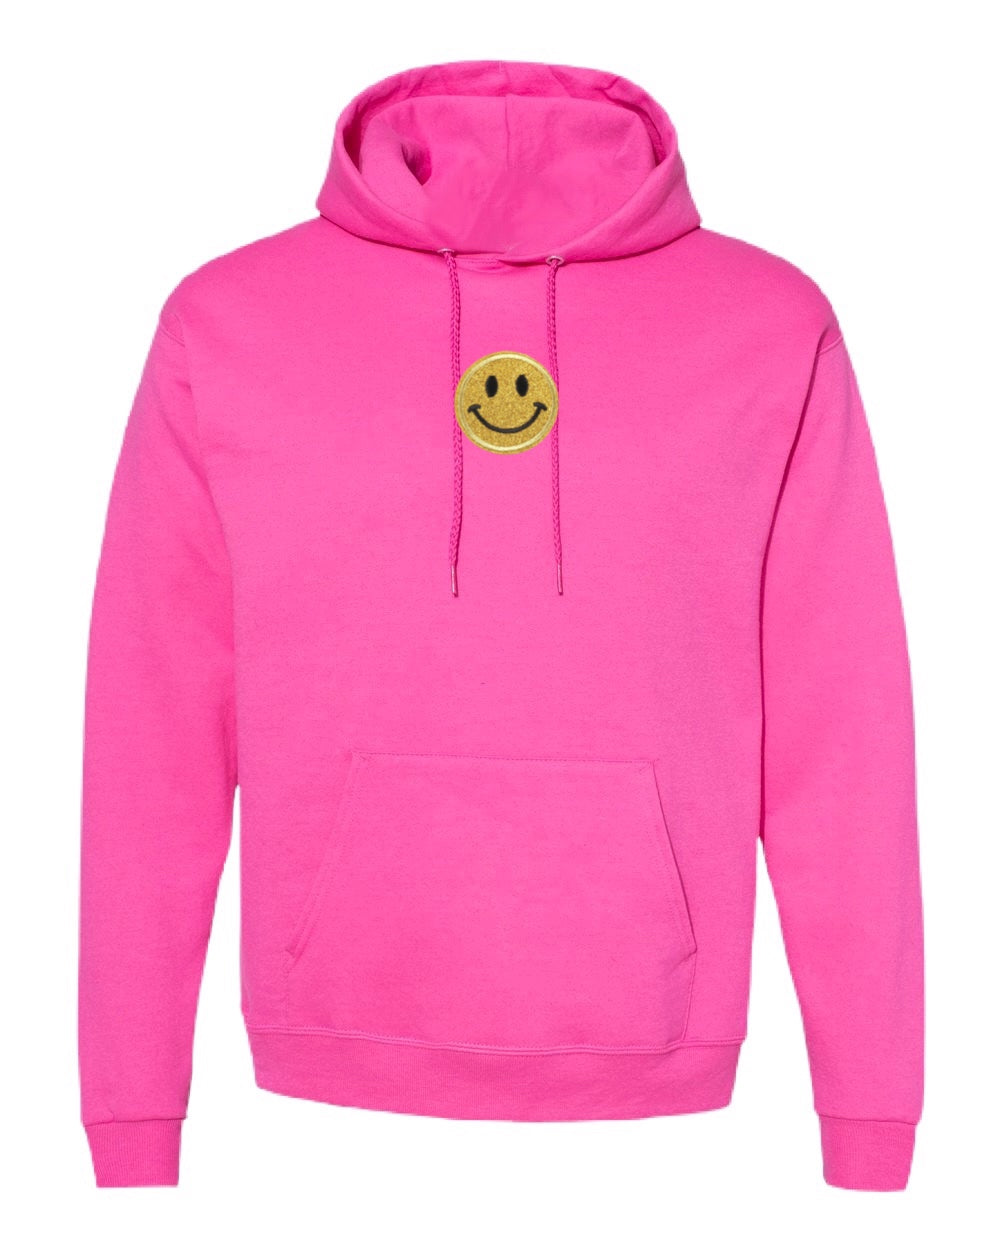 GOLD SMILEY FACE HOODIE